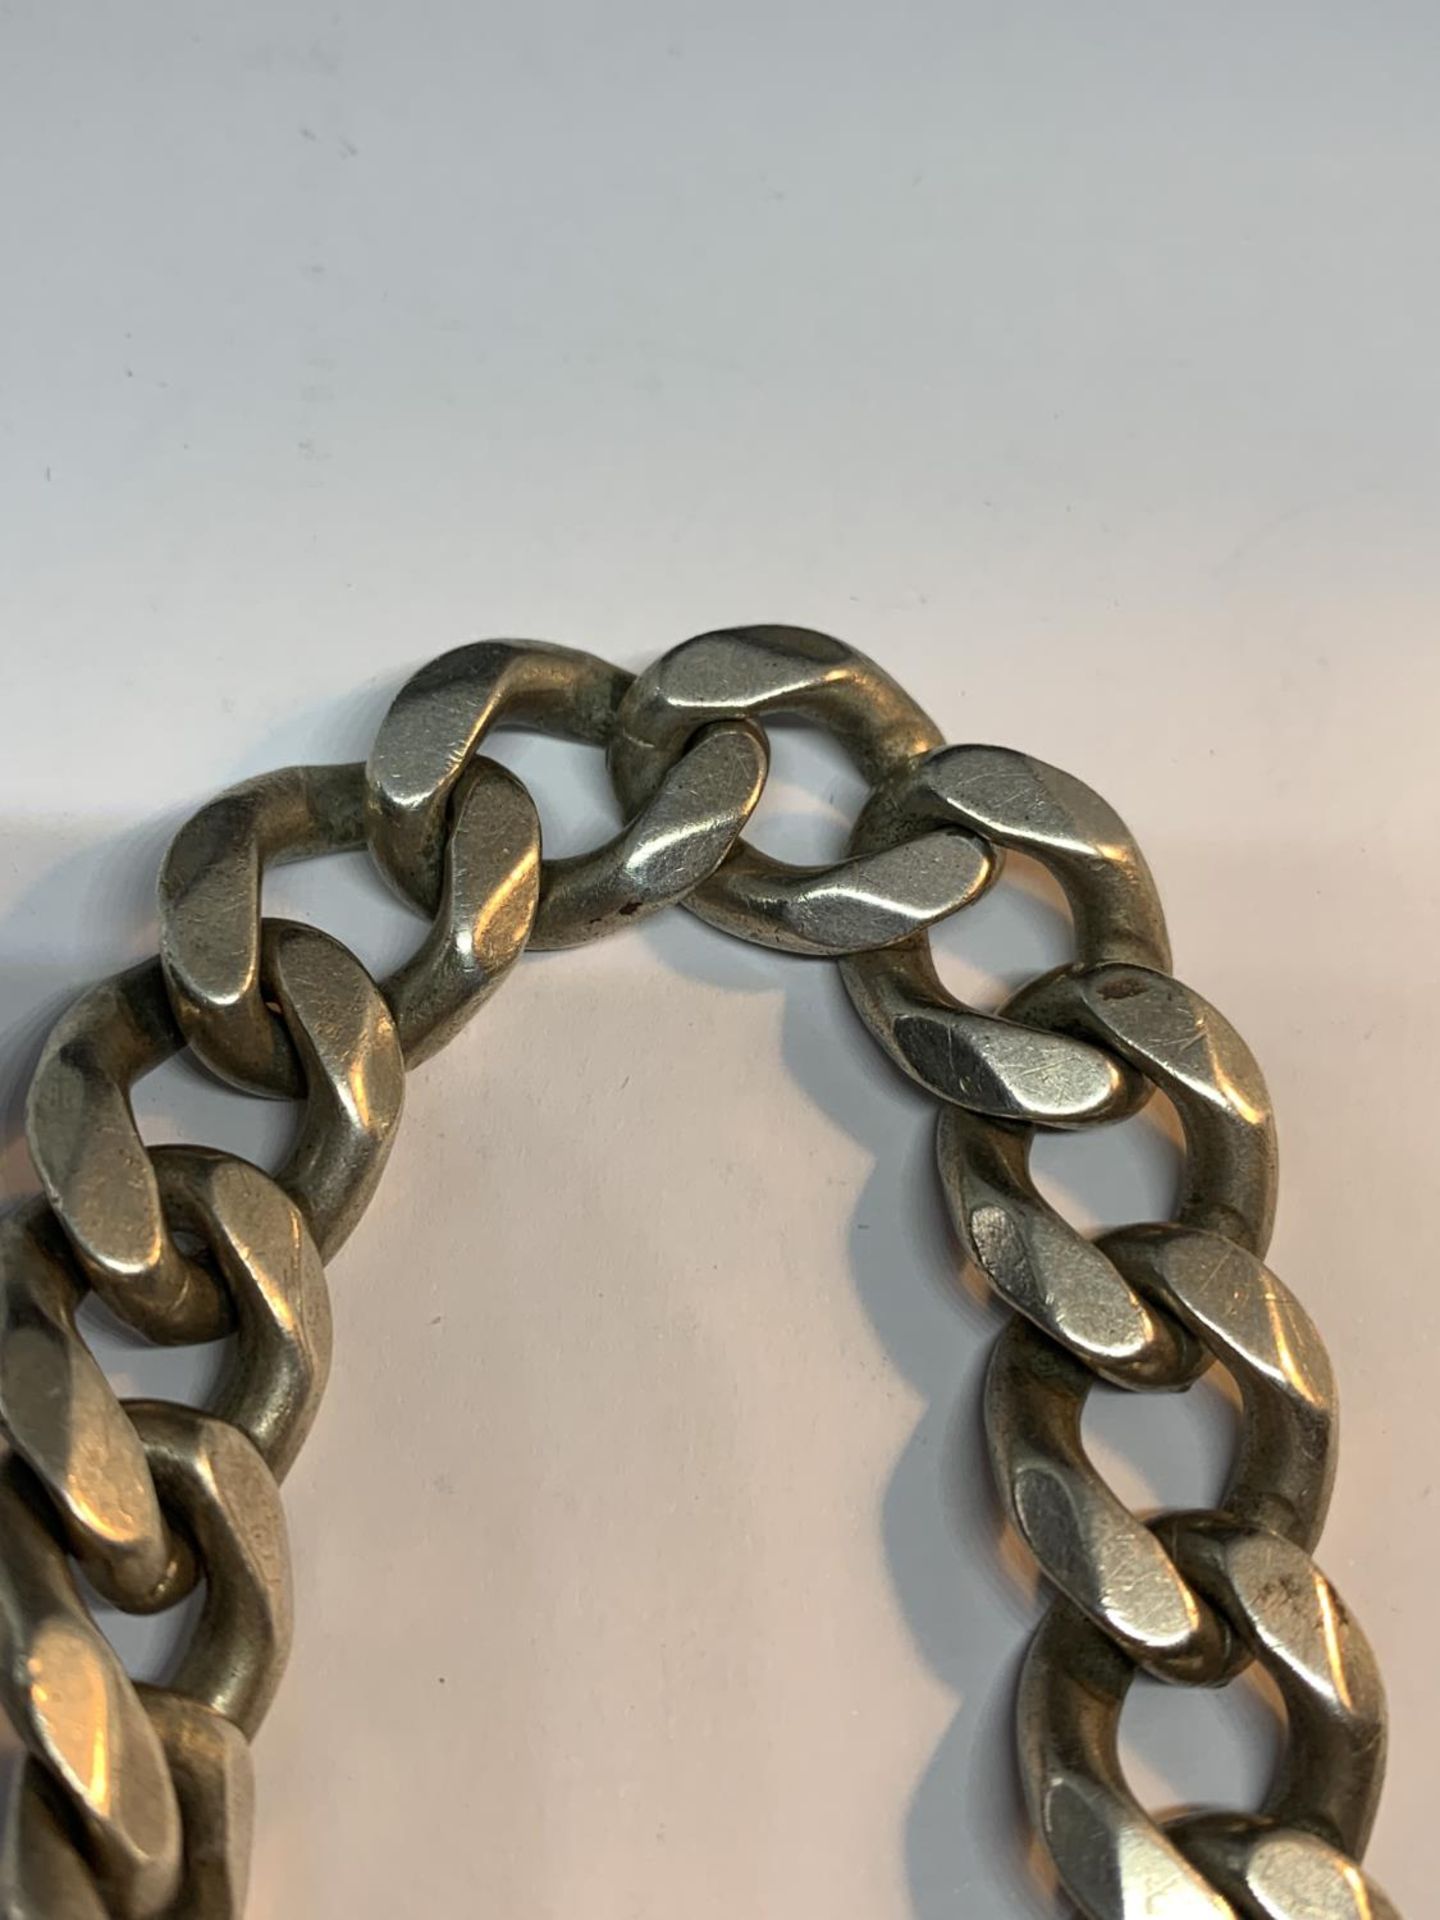 A VERY HEAVY SILVER FLAT LINK WRIST CHAIN - Image 4 of 4